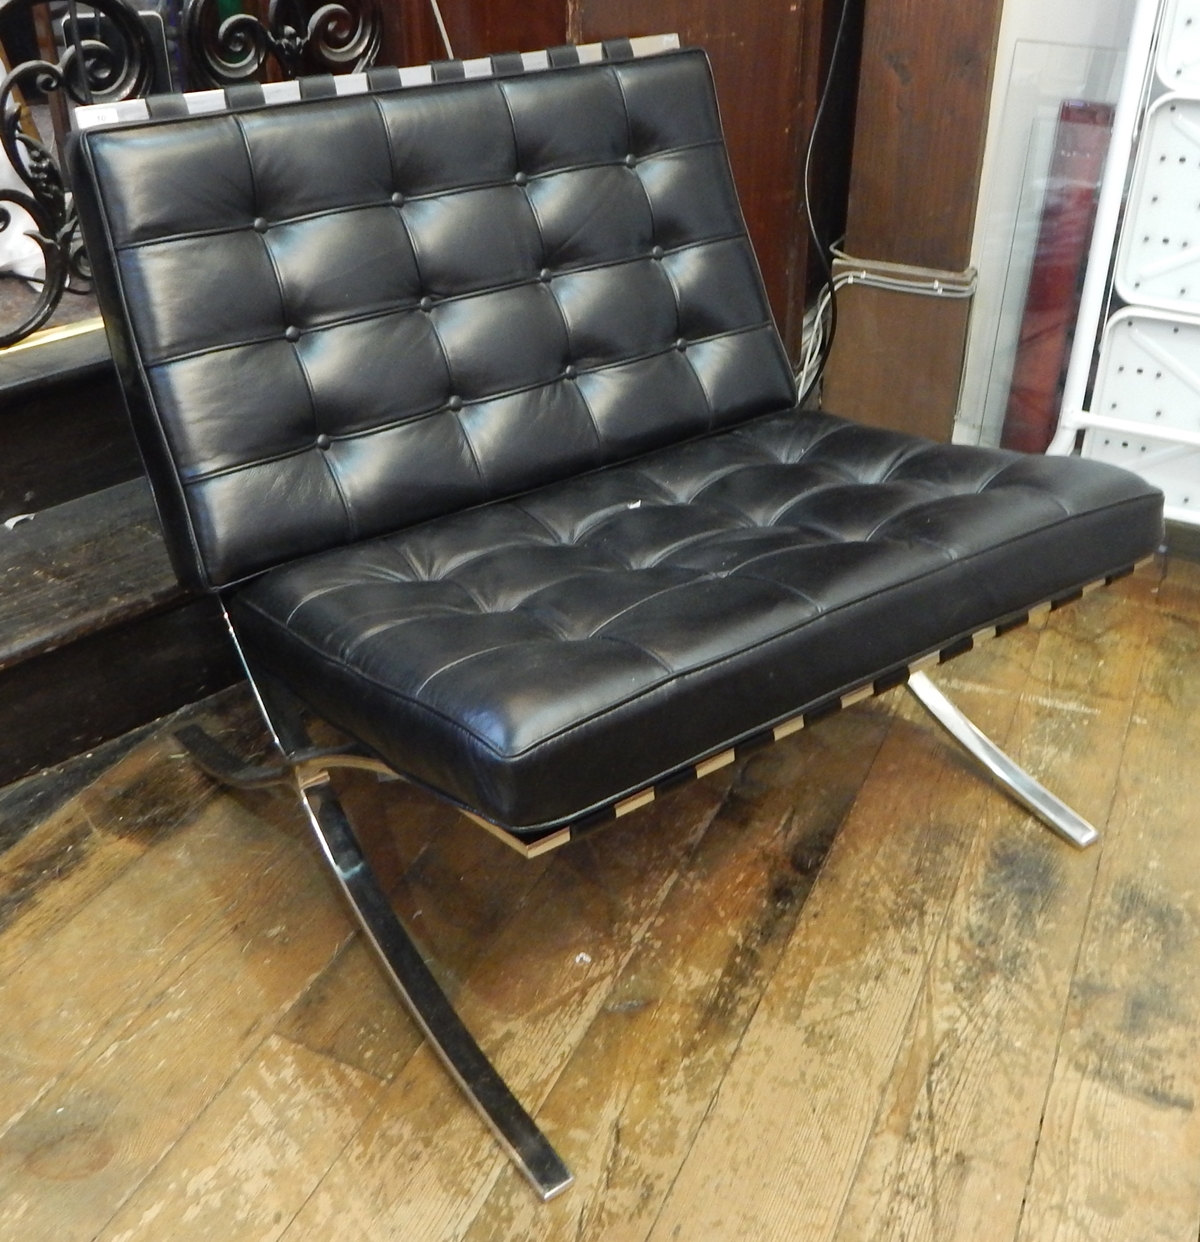 Chrome and black leather Barcelona style chair after Mies van der Rohe (originally designed 1929)